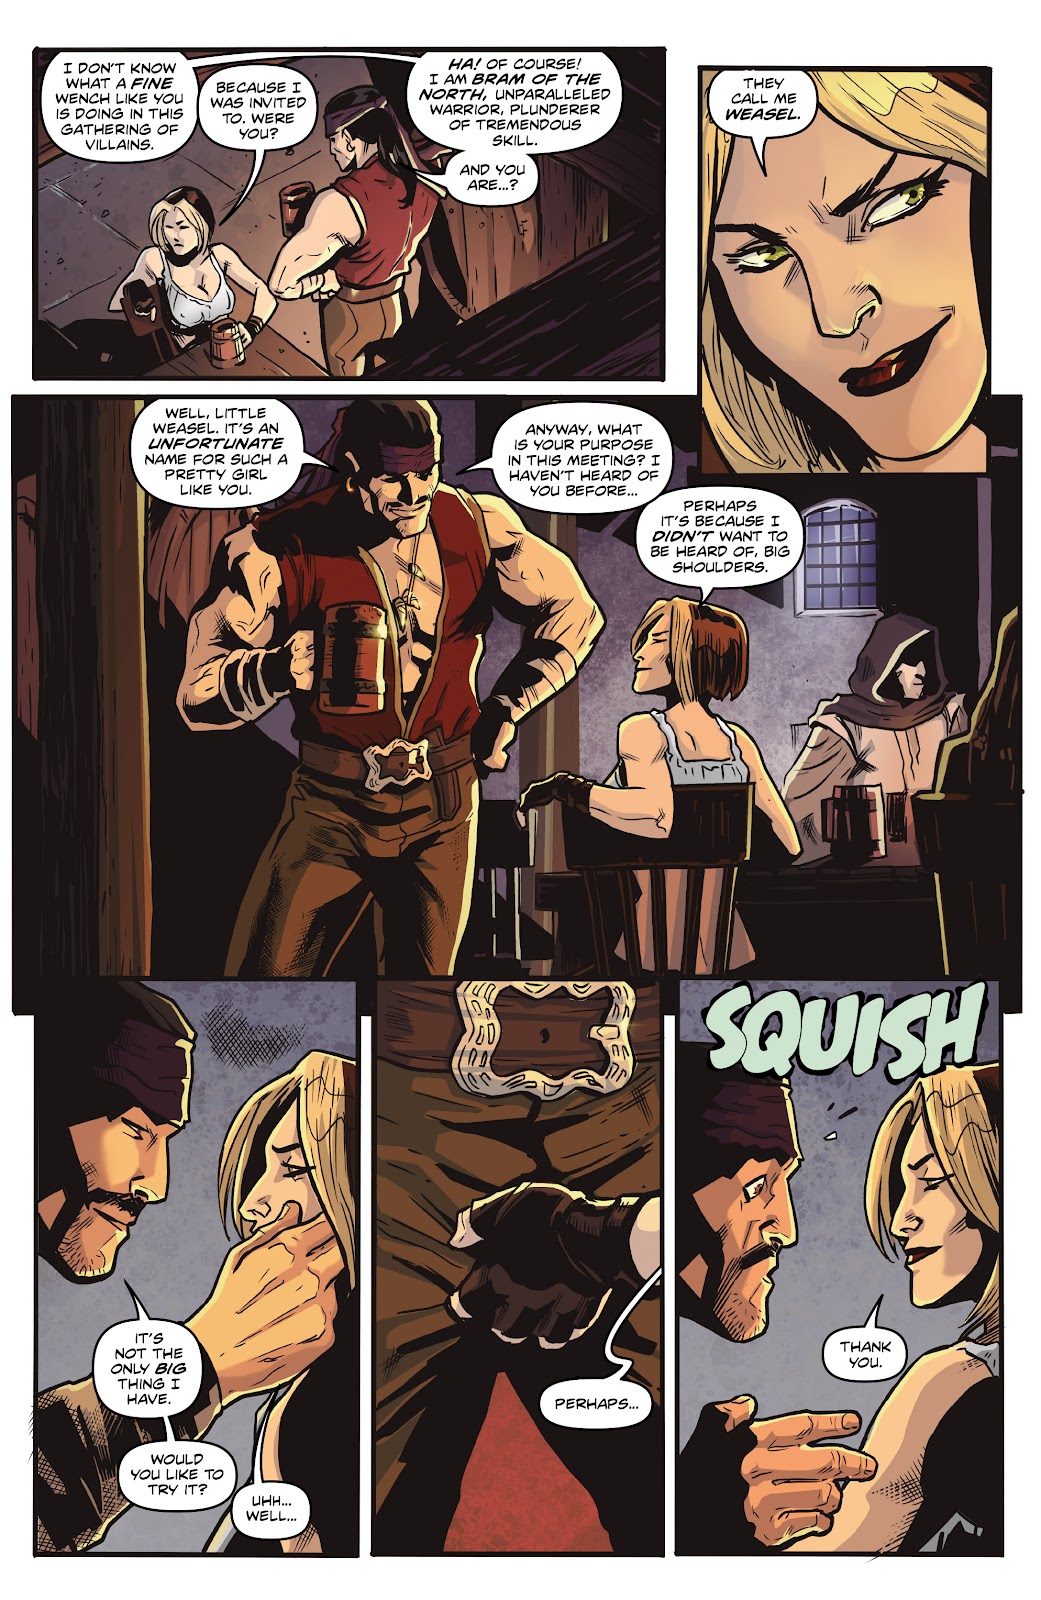 Rogues!: The Burning Heart issue 4 - Page 13